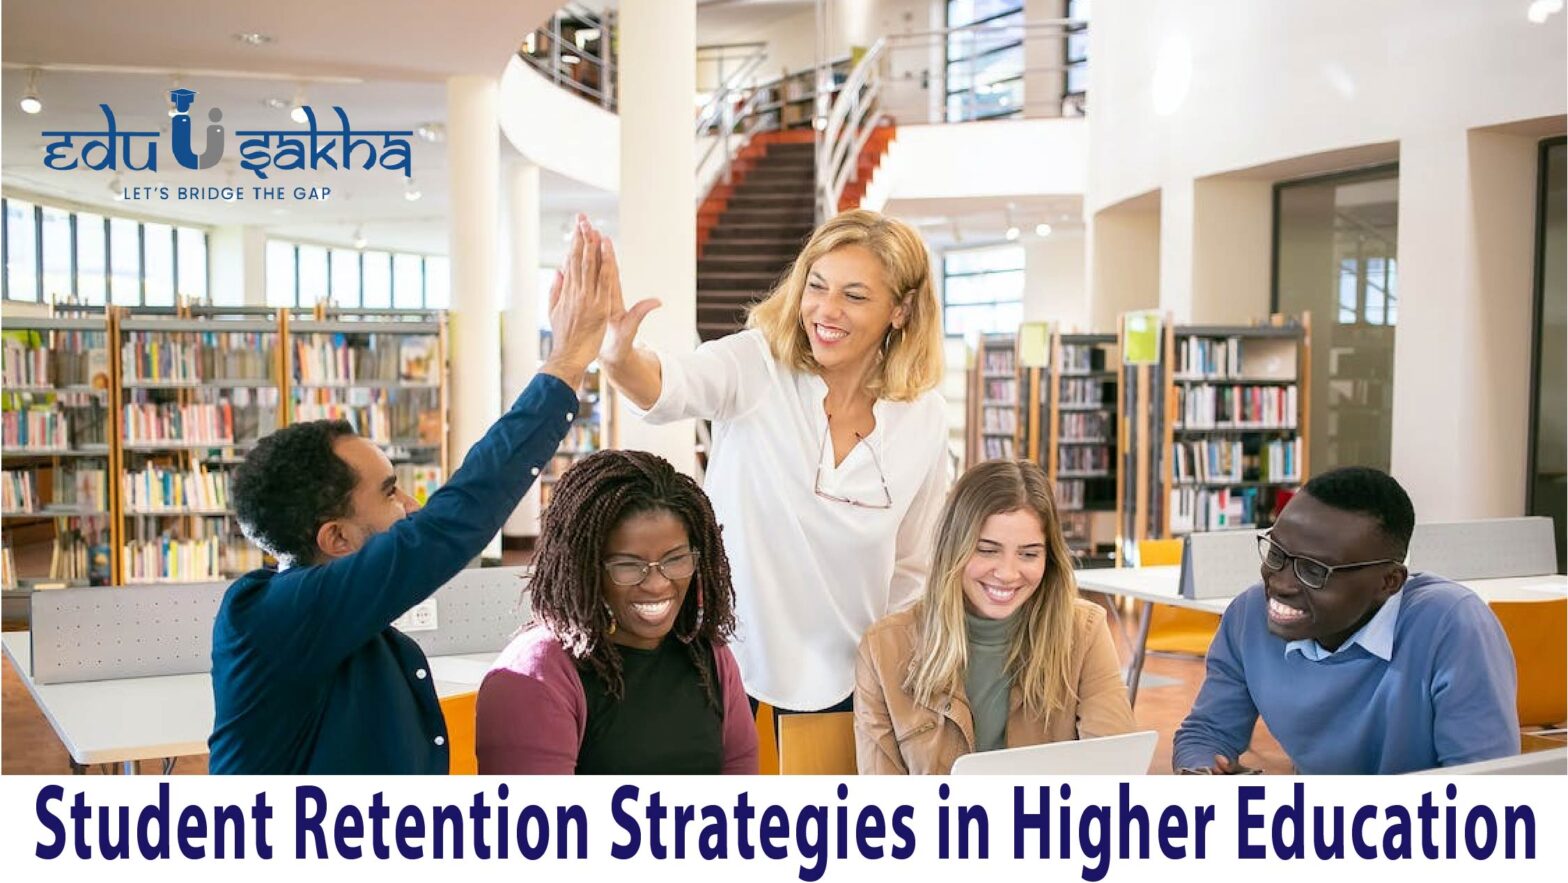 Student Retention Strategies in Higher Education